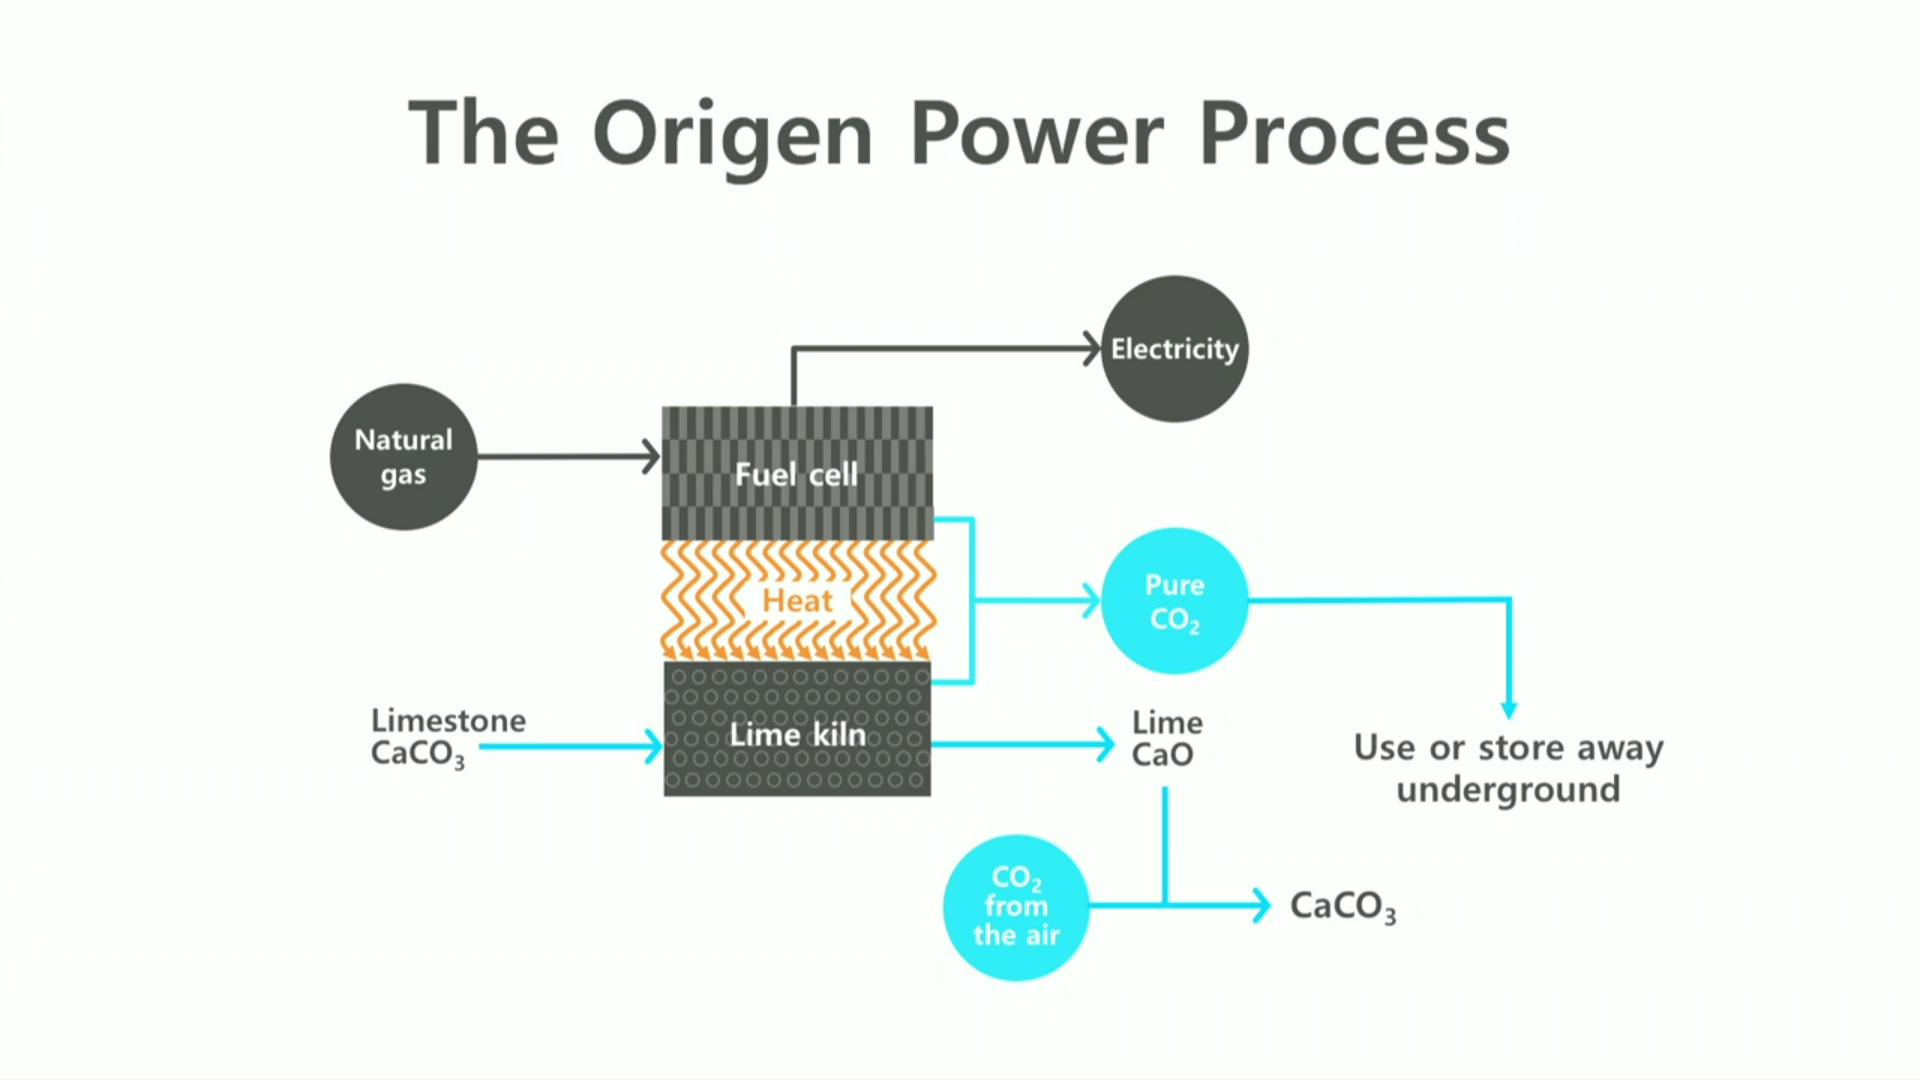 Processing power